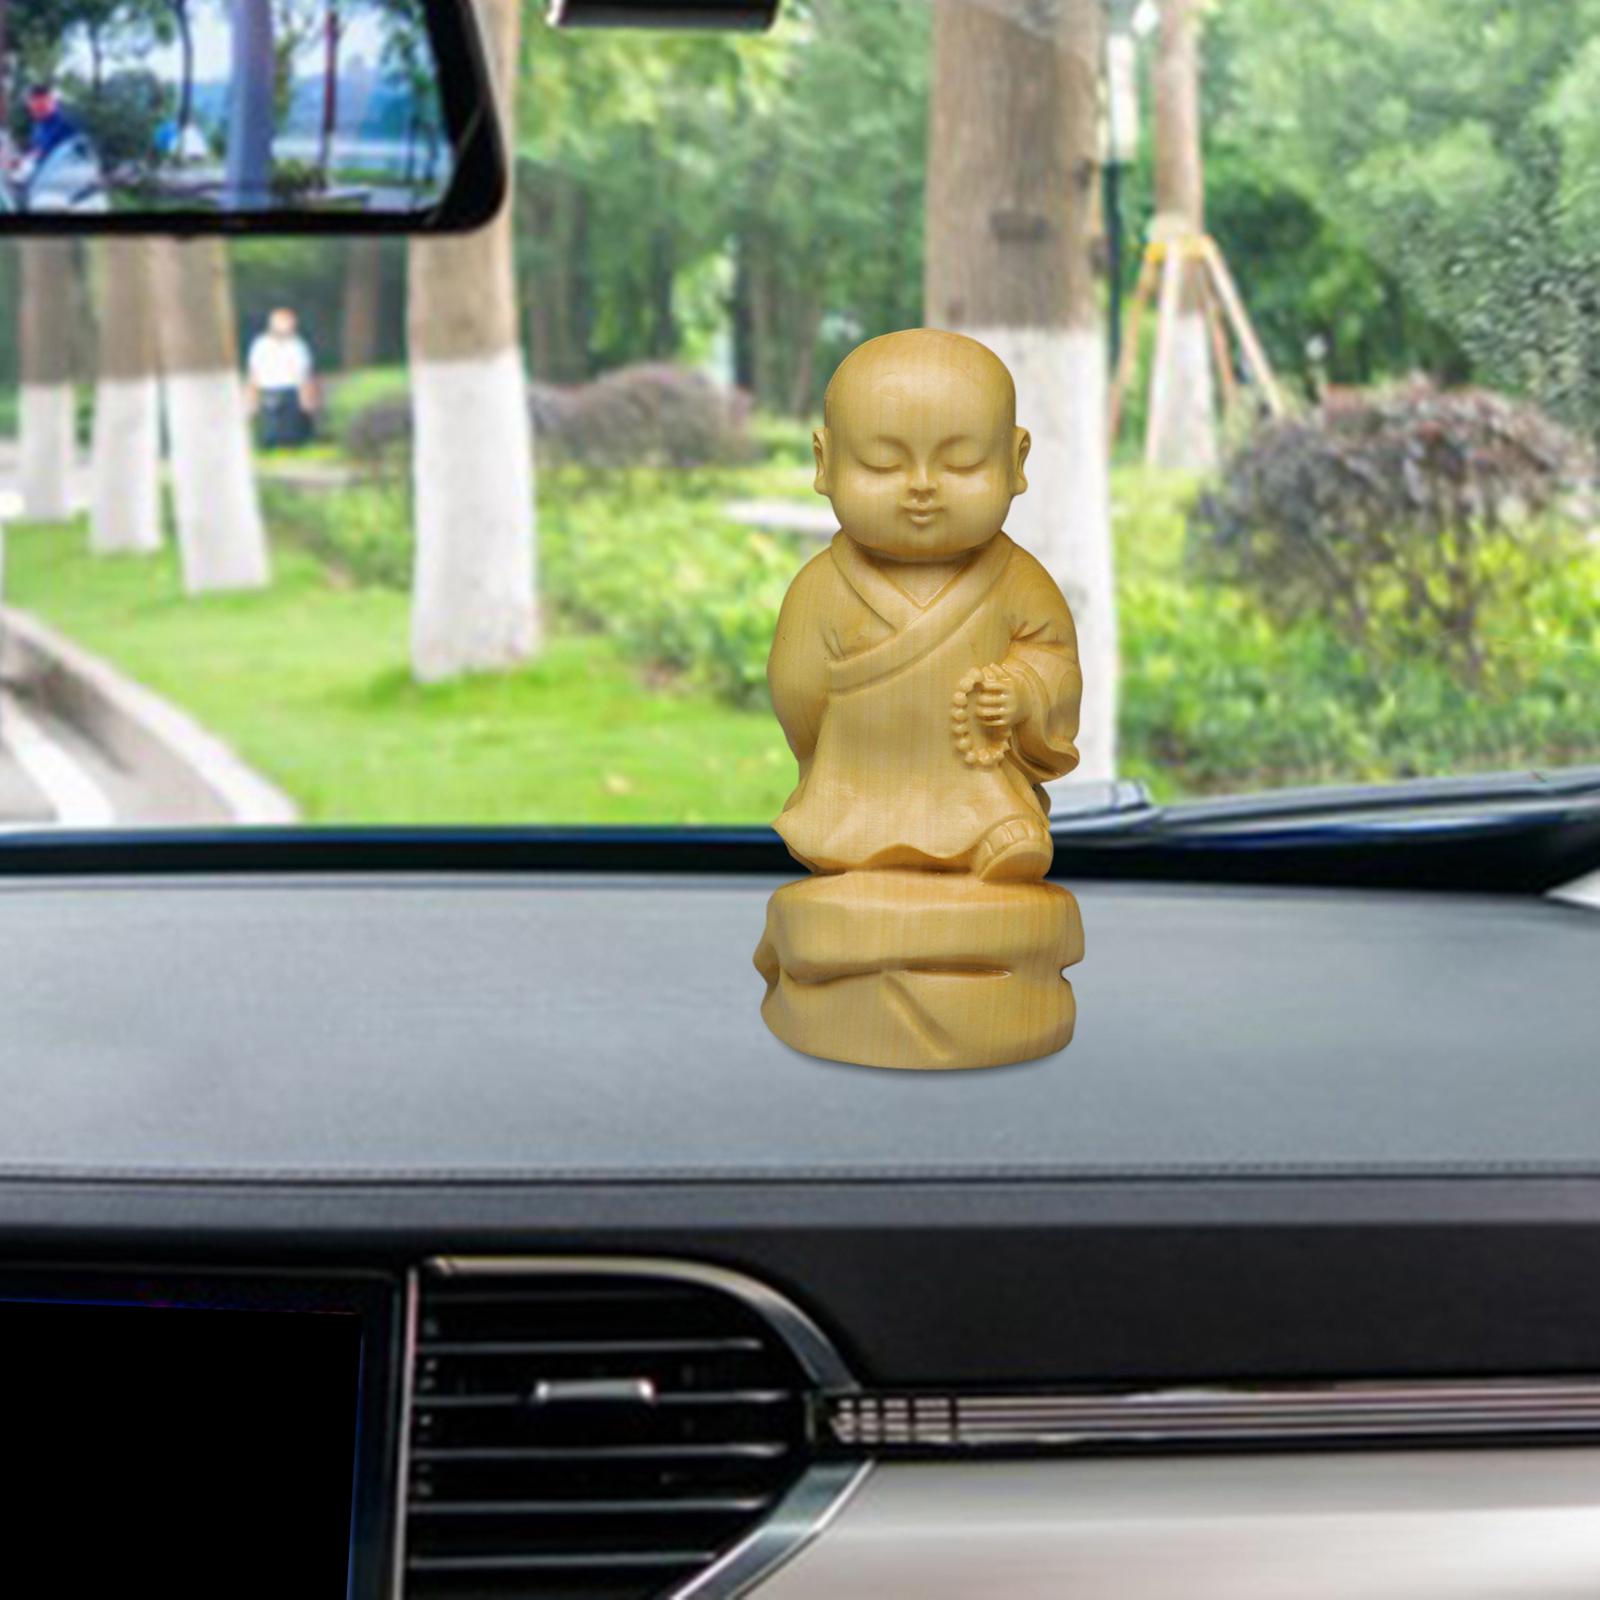 Car Dashboard Figurine Sculptures Standing Monk Statue for Home Office